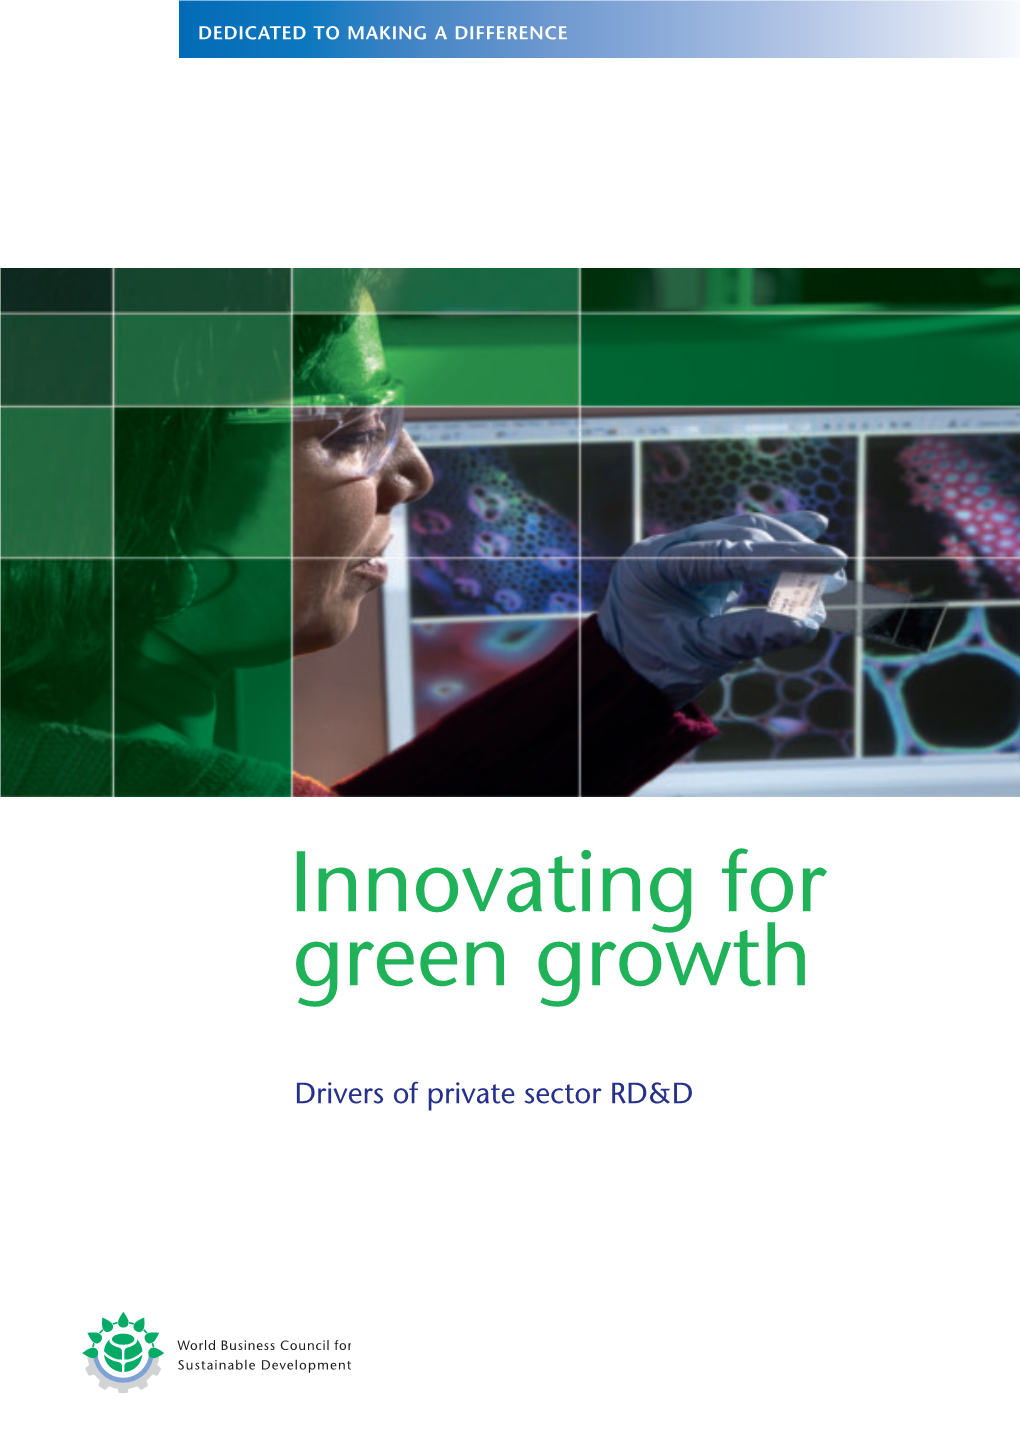 Innovating for Green Growth